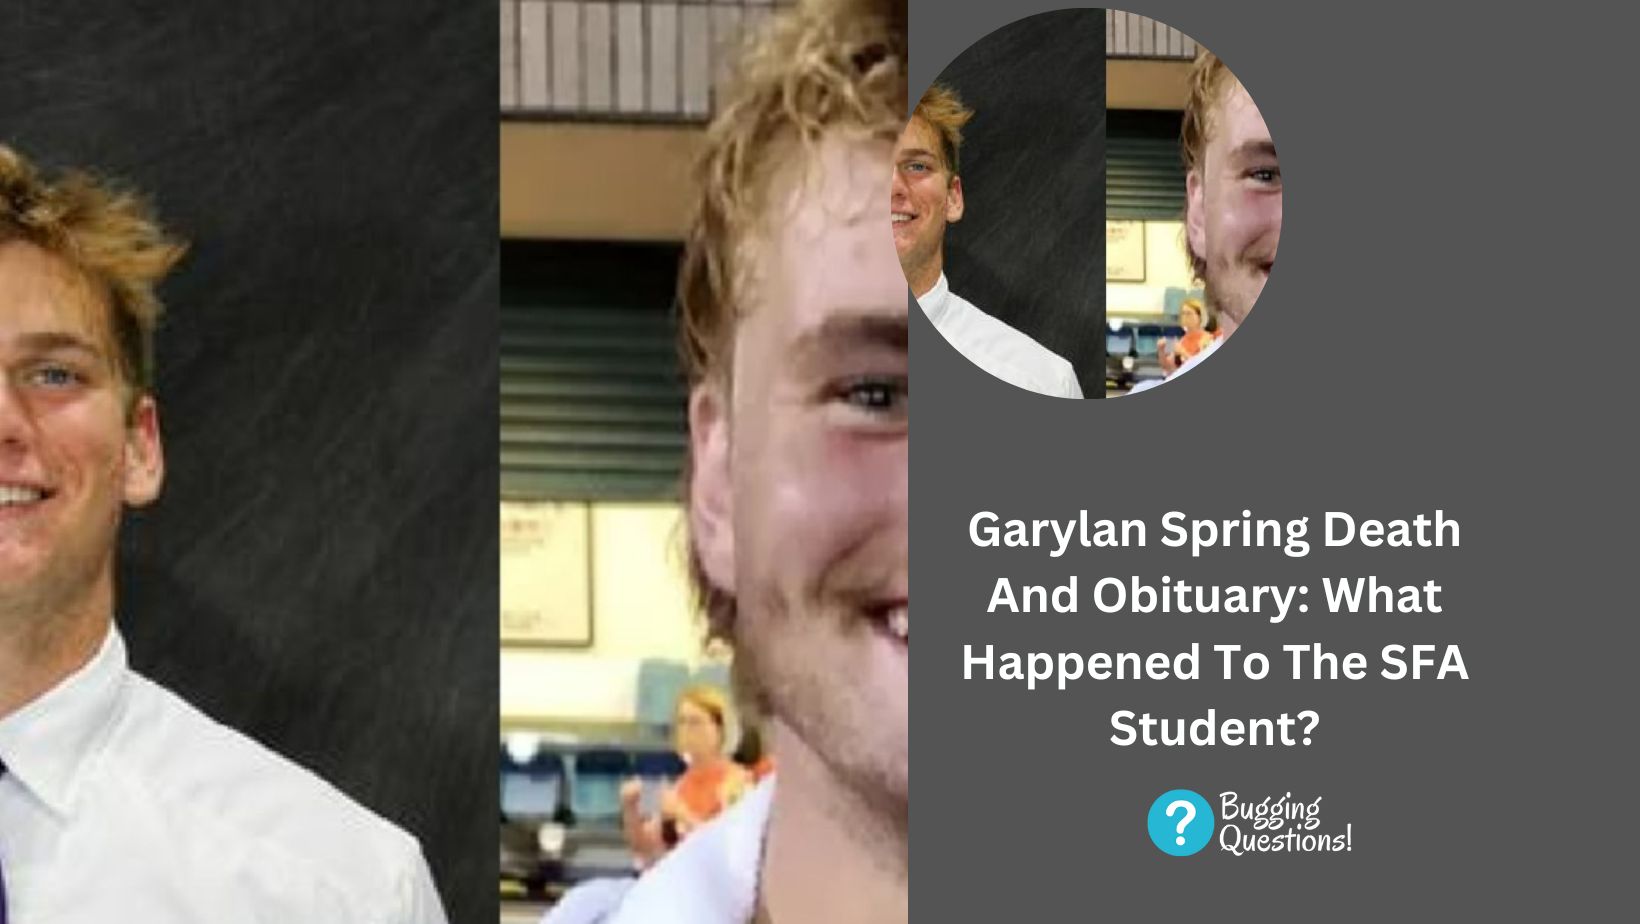 Garylan Spring Death And Obituary: What Happened To The SFA Student?